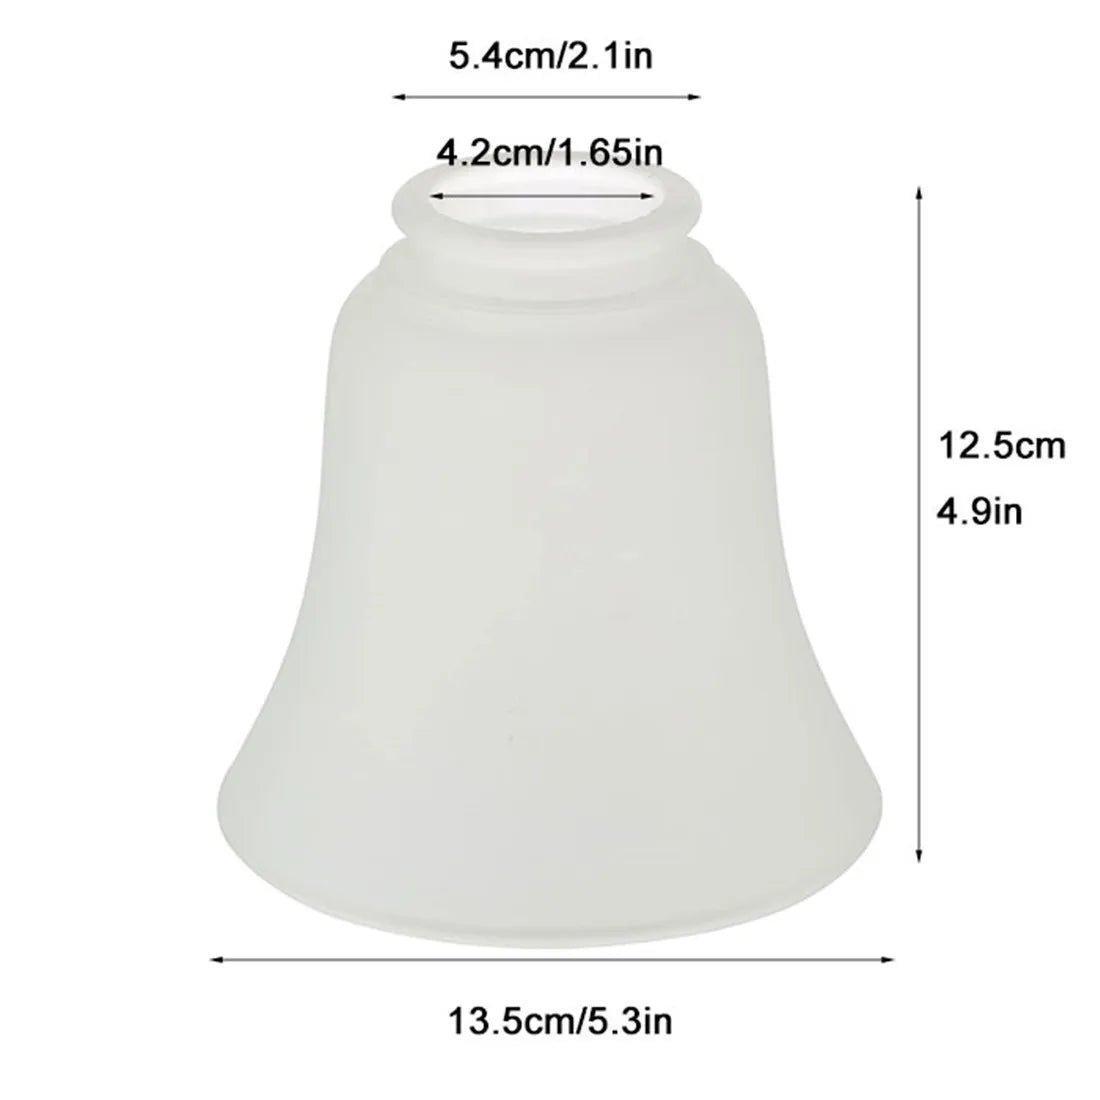 Screw Fixed Frosted Glass Shades Bell Shaped Glass Shade Covers Ceiling Fan Lamp Replacements for Chandelier Wall Sconces - Specialty Shades